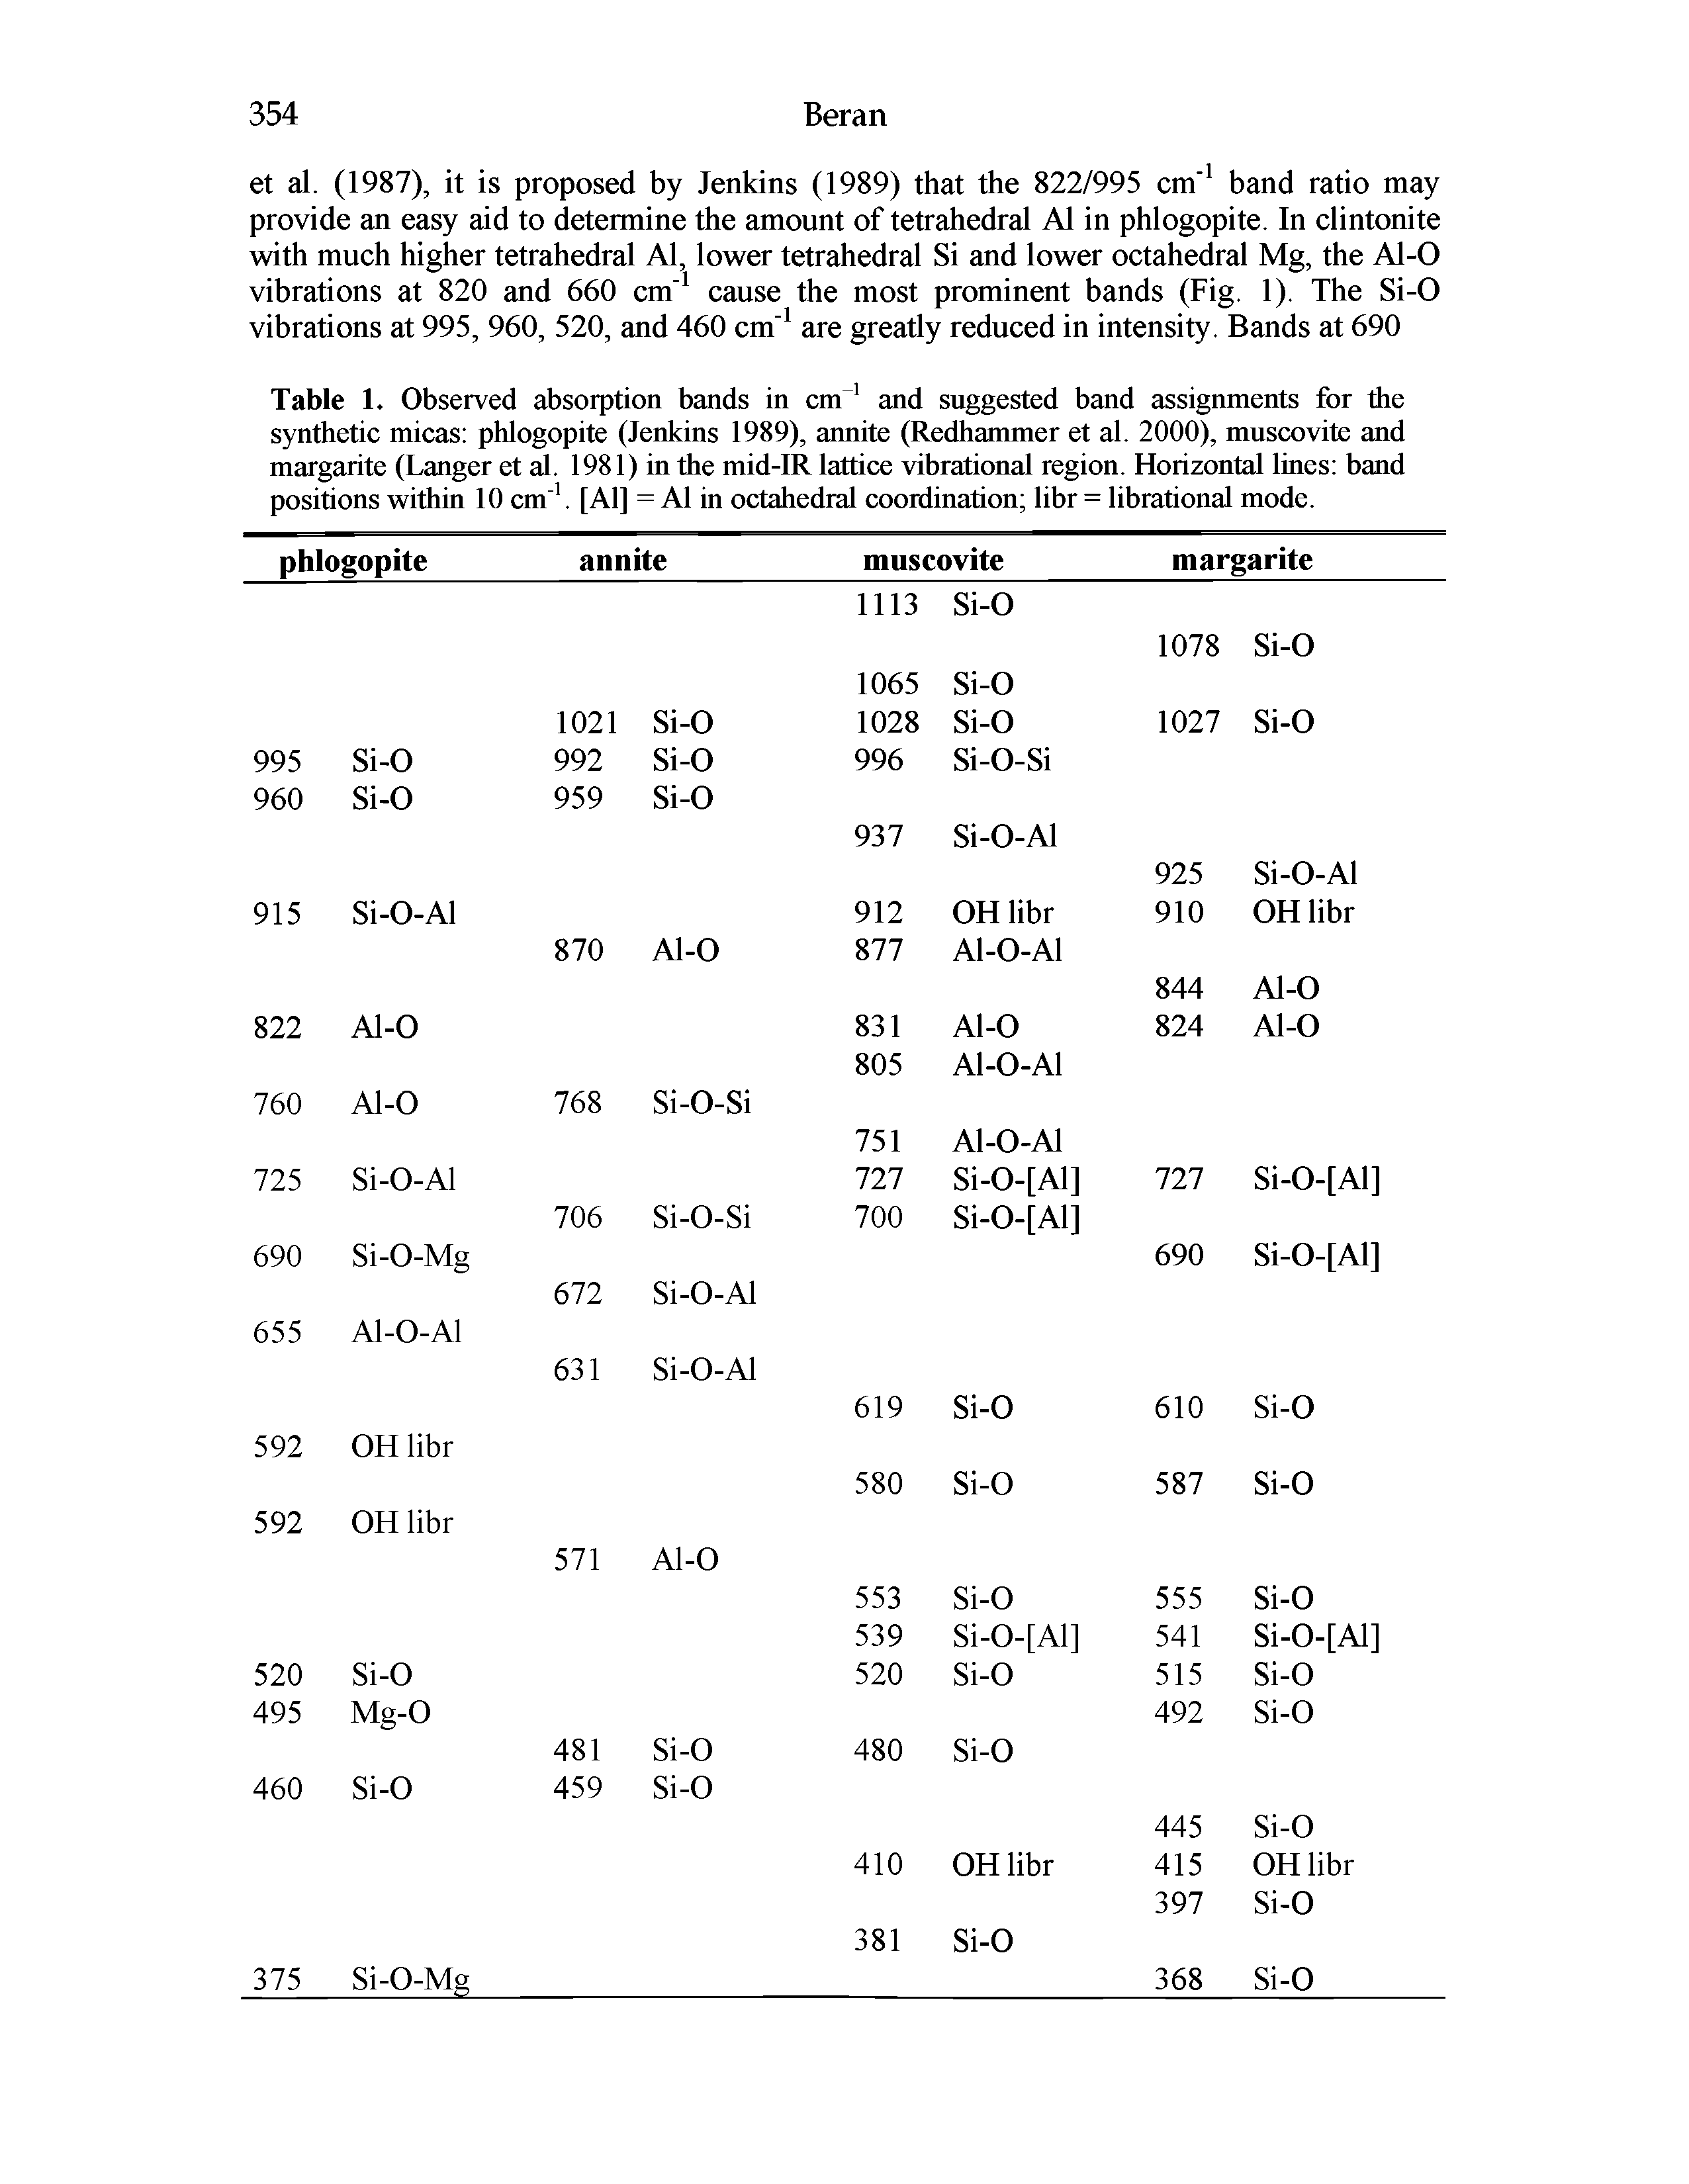 Table 1. Observed absorption bands in cm and suggested band assignments for the synthetic micas phlogopite (Jenkins 1989), annite (Redhammer et al. 2000), muscovite and margarite (Langer et al. 1981) in the mid-lR lattice vibrational region. Horizontal lines band positions within 10 cm . [Al] = Al in octahedral coordination libr = librational mode.